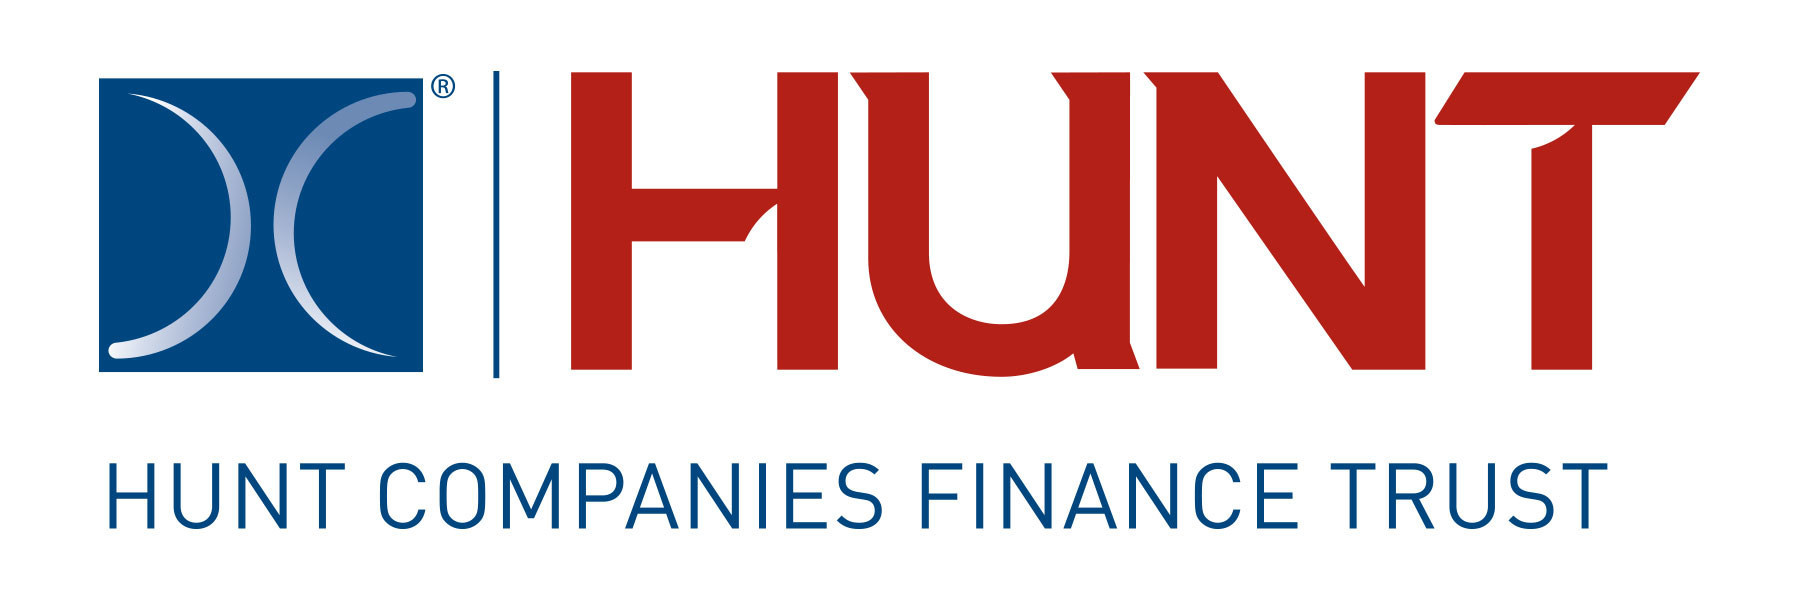 Hunt Companies Finance Trust Announces Second Consecutive Quarterly Dividend Increase